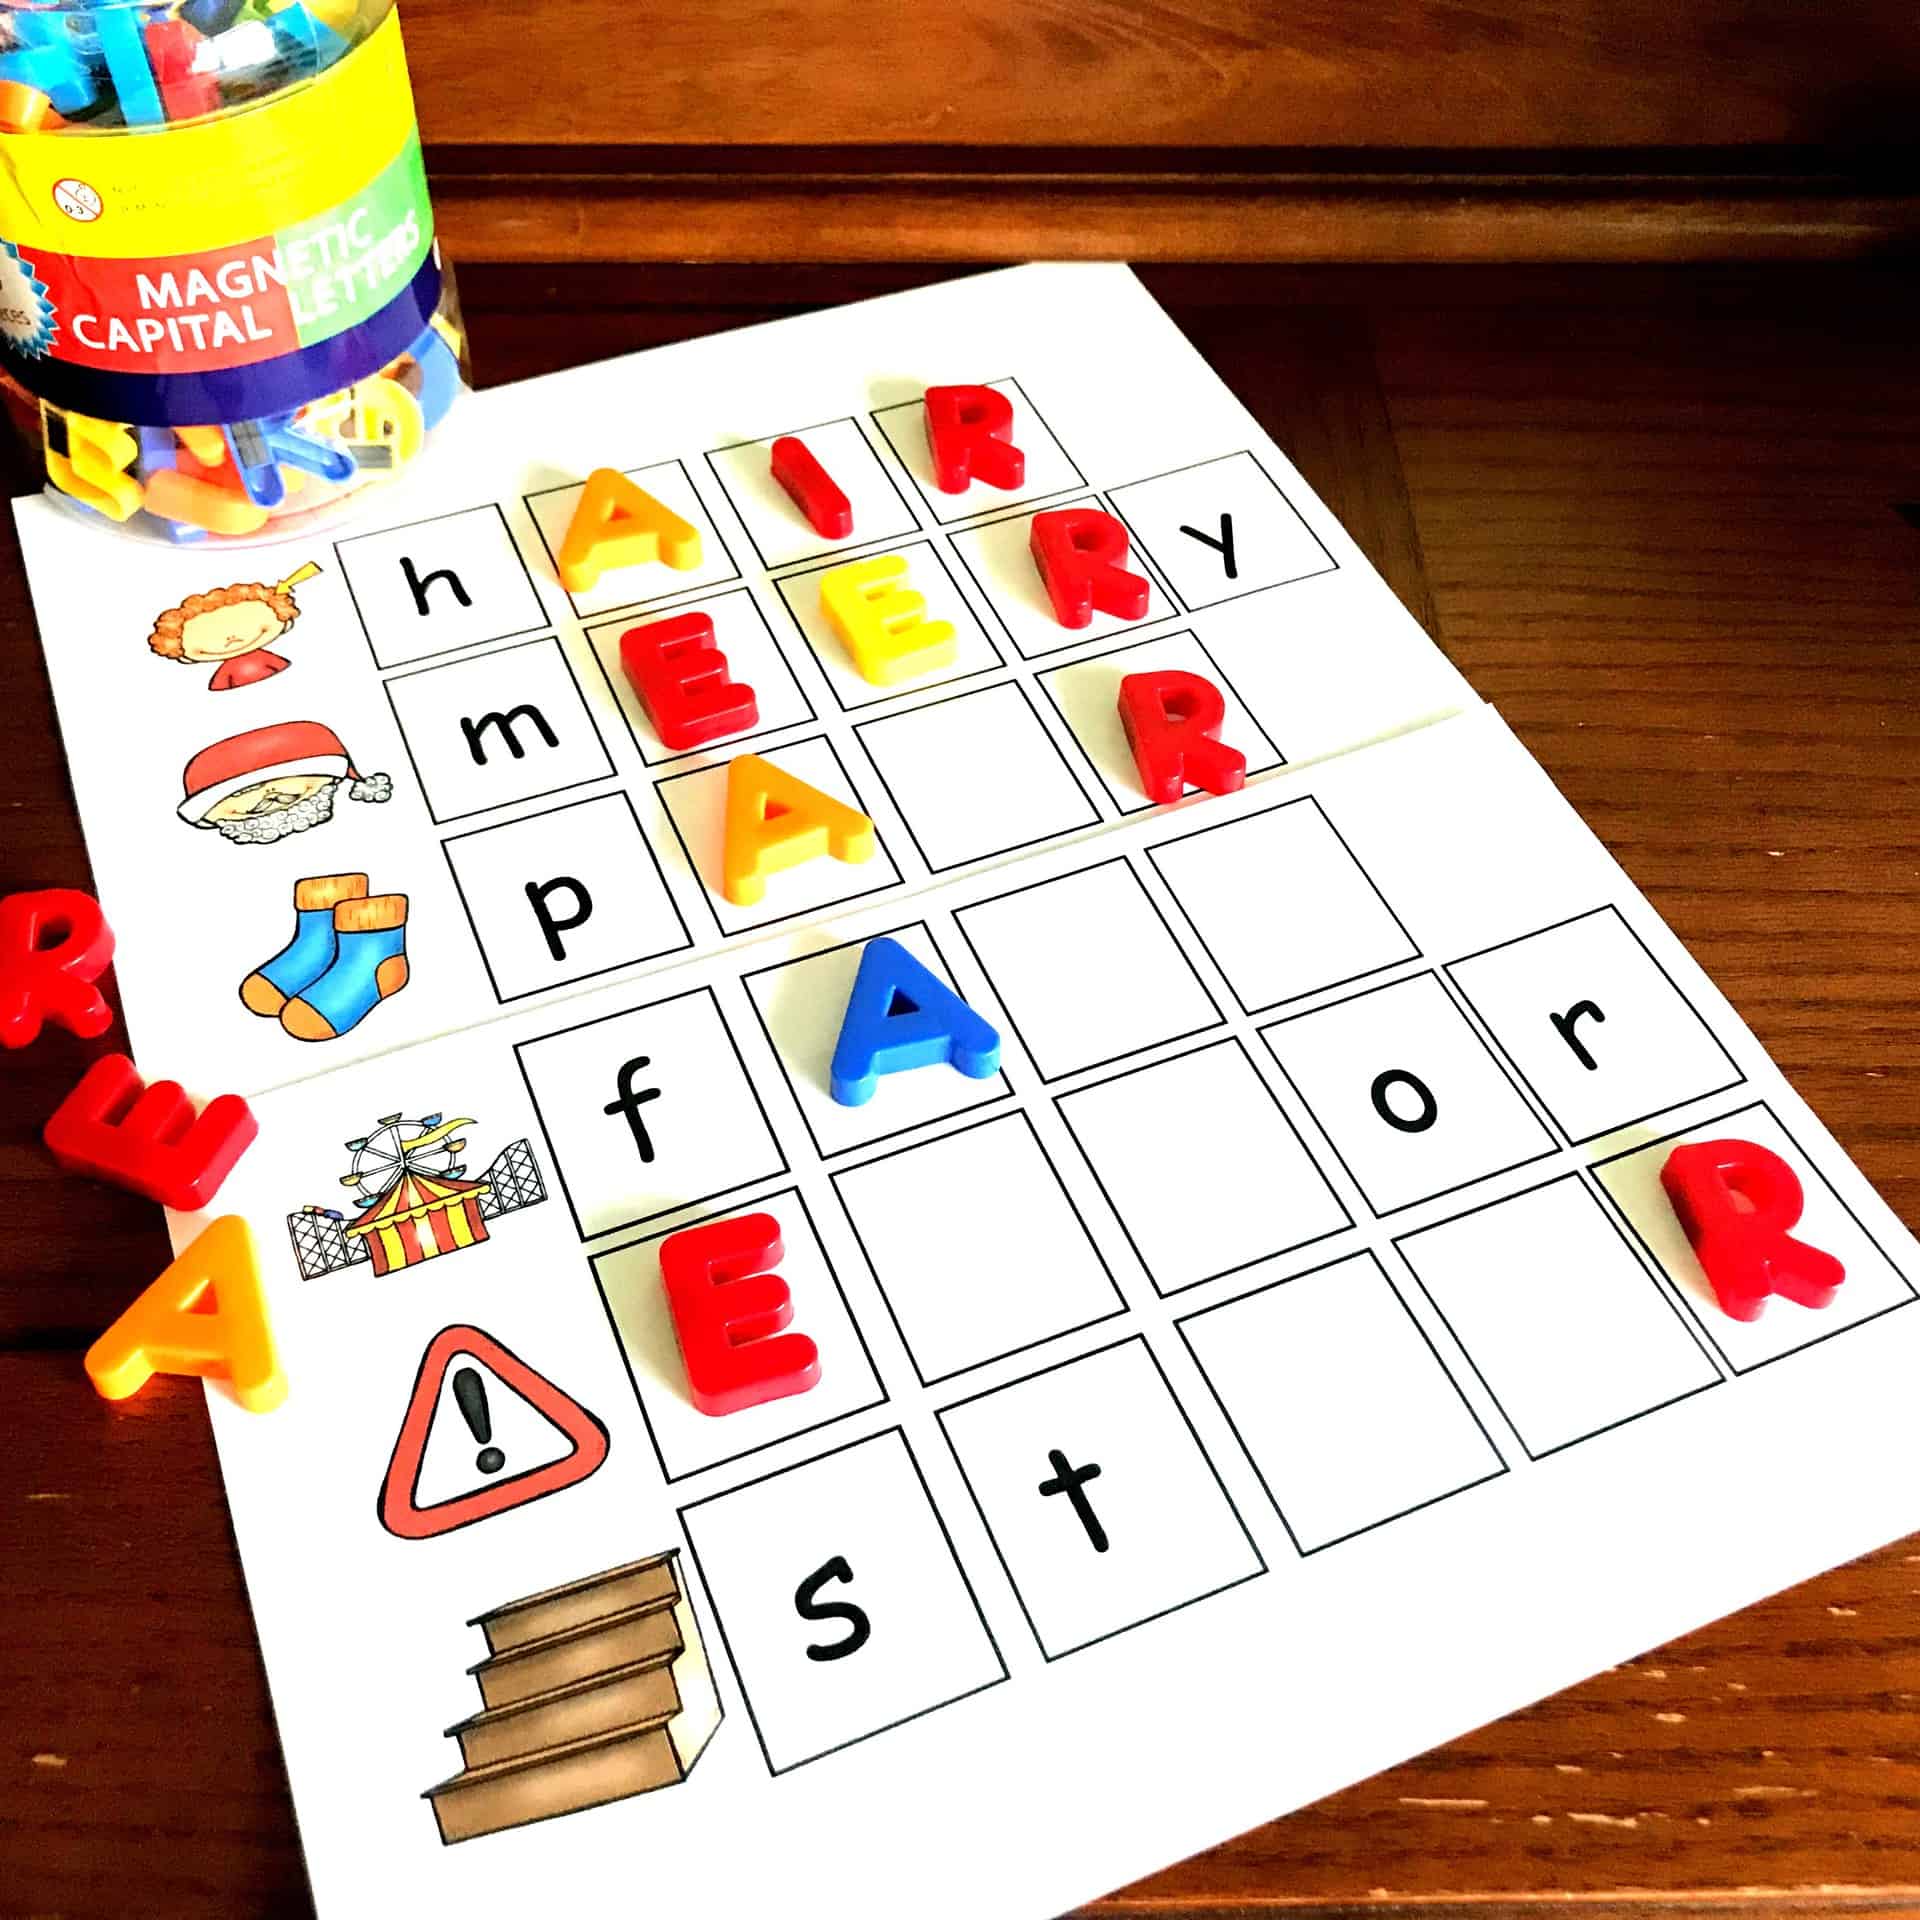 Fill in the Blank | -eir, -err, and -air | Air Phonics Game | Free Printable